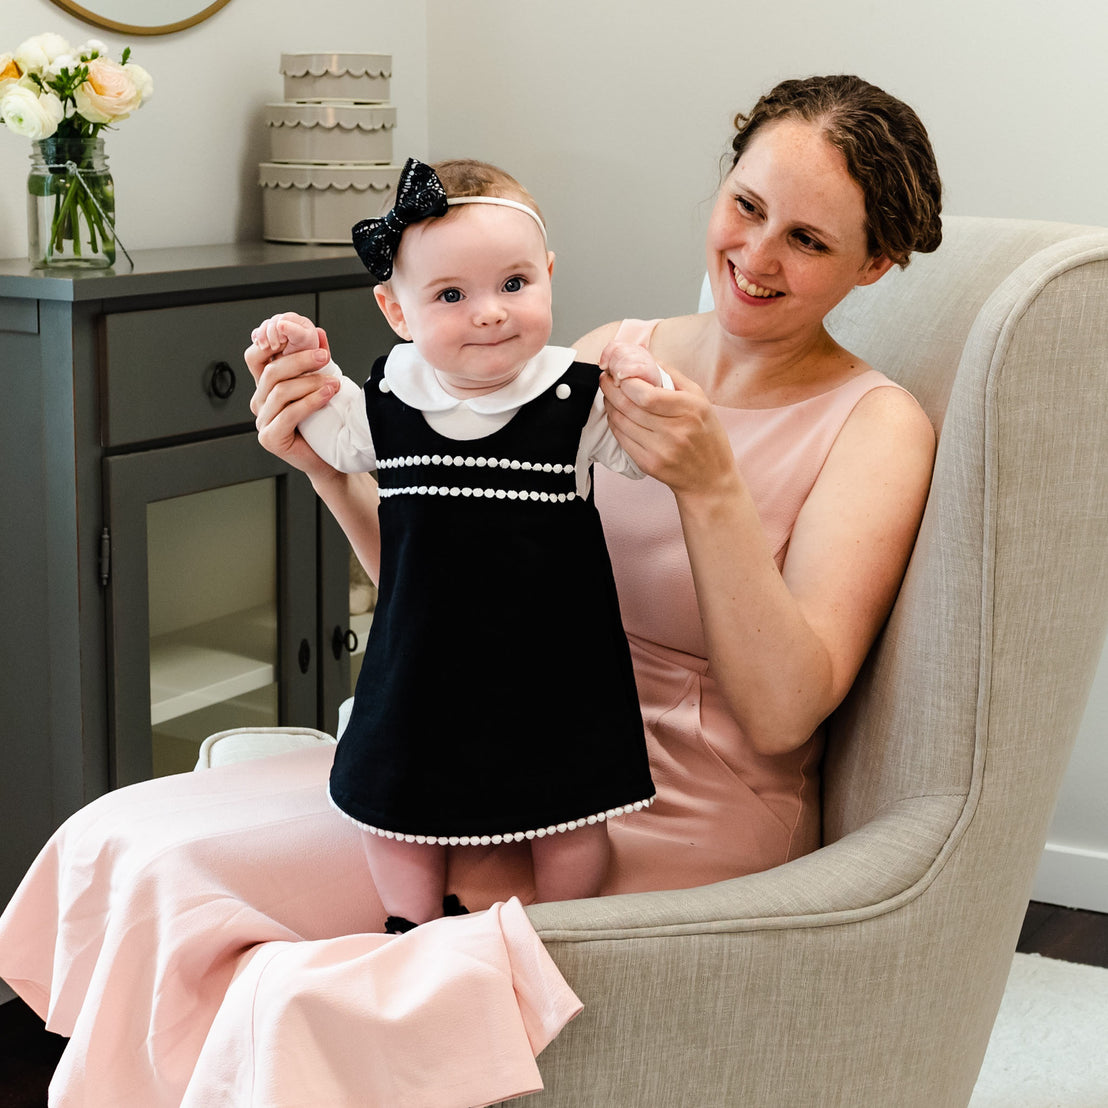 A woman in a pink dress smiles, sitting in an armchair and holding up a baby girl in a June Jumper Dress Set with pearl trim, who is playfully trying to stand. 